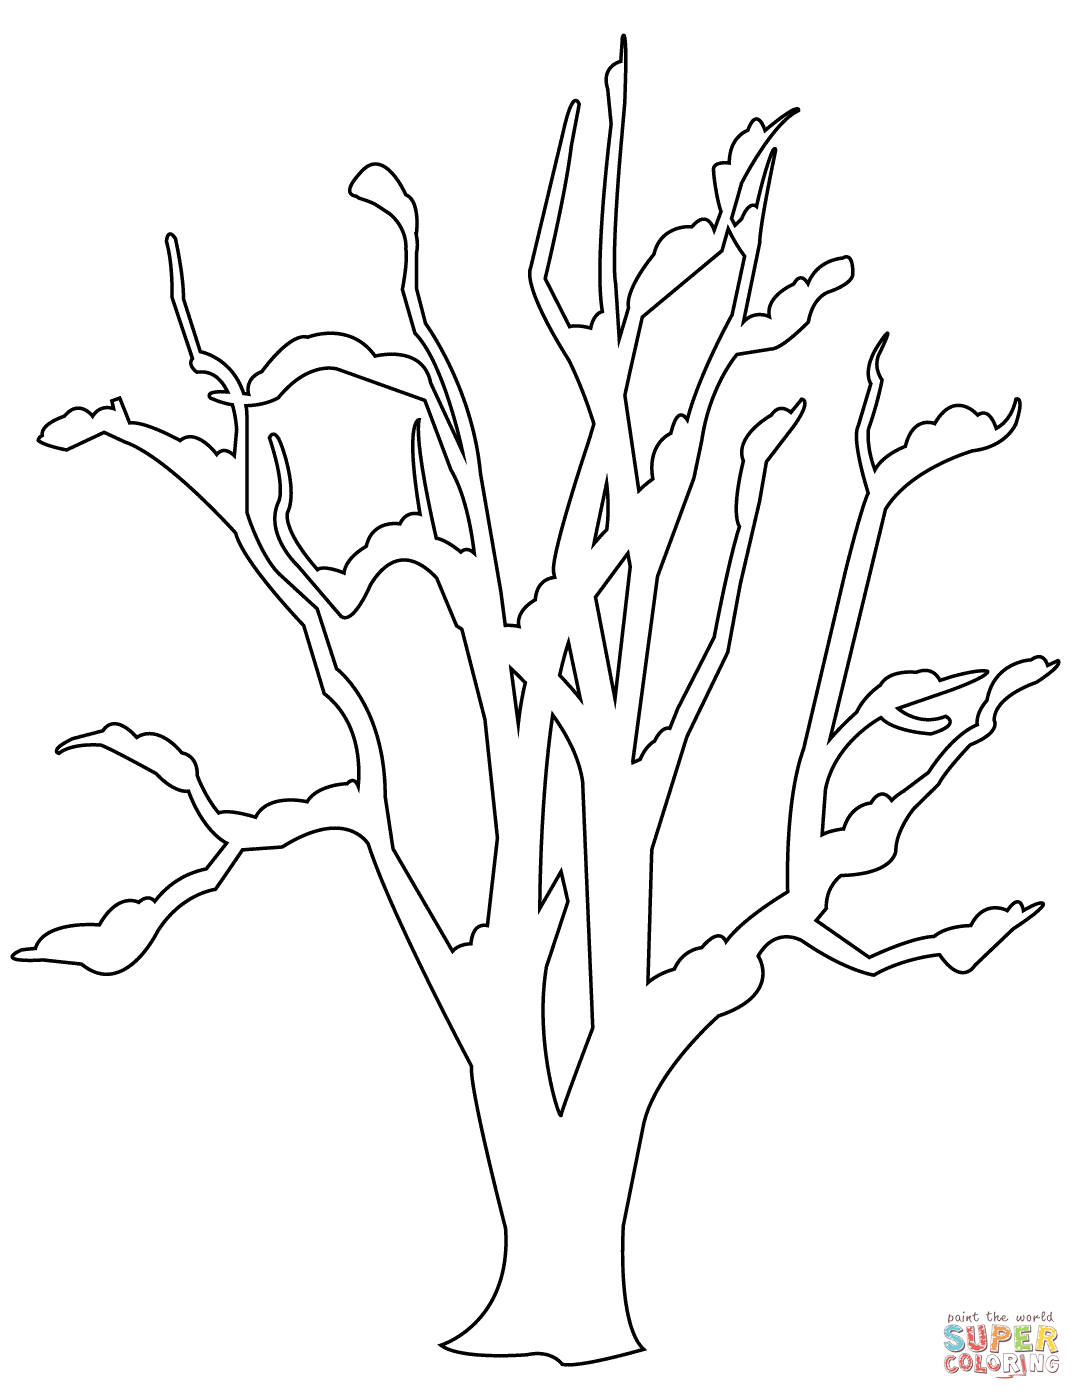 Roots coloring #11, Download drawings